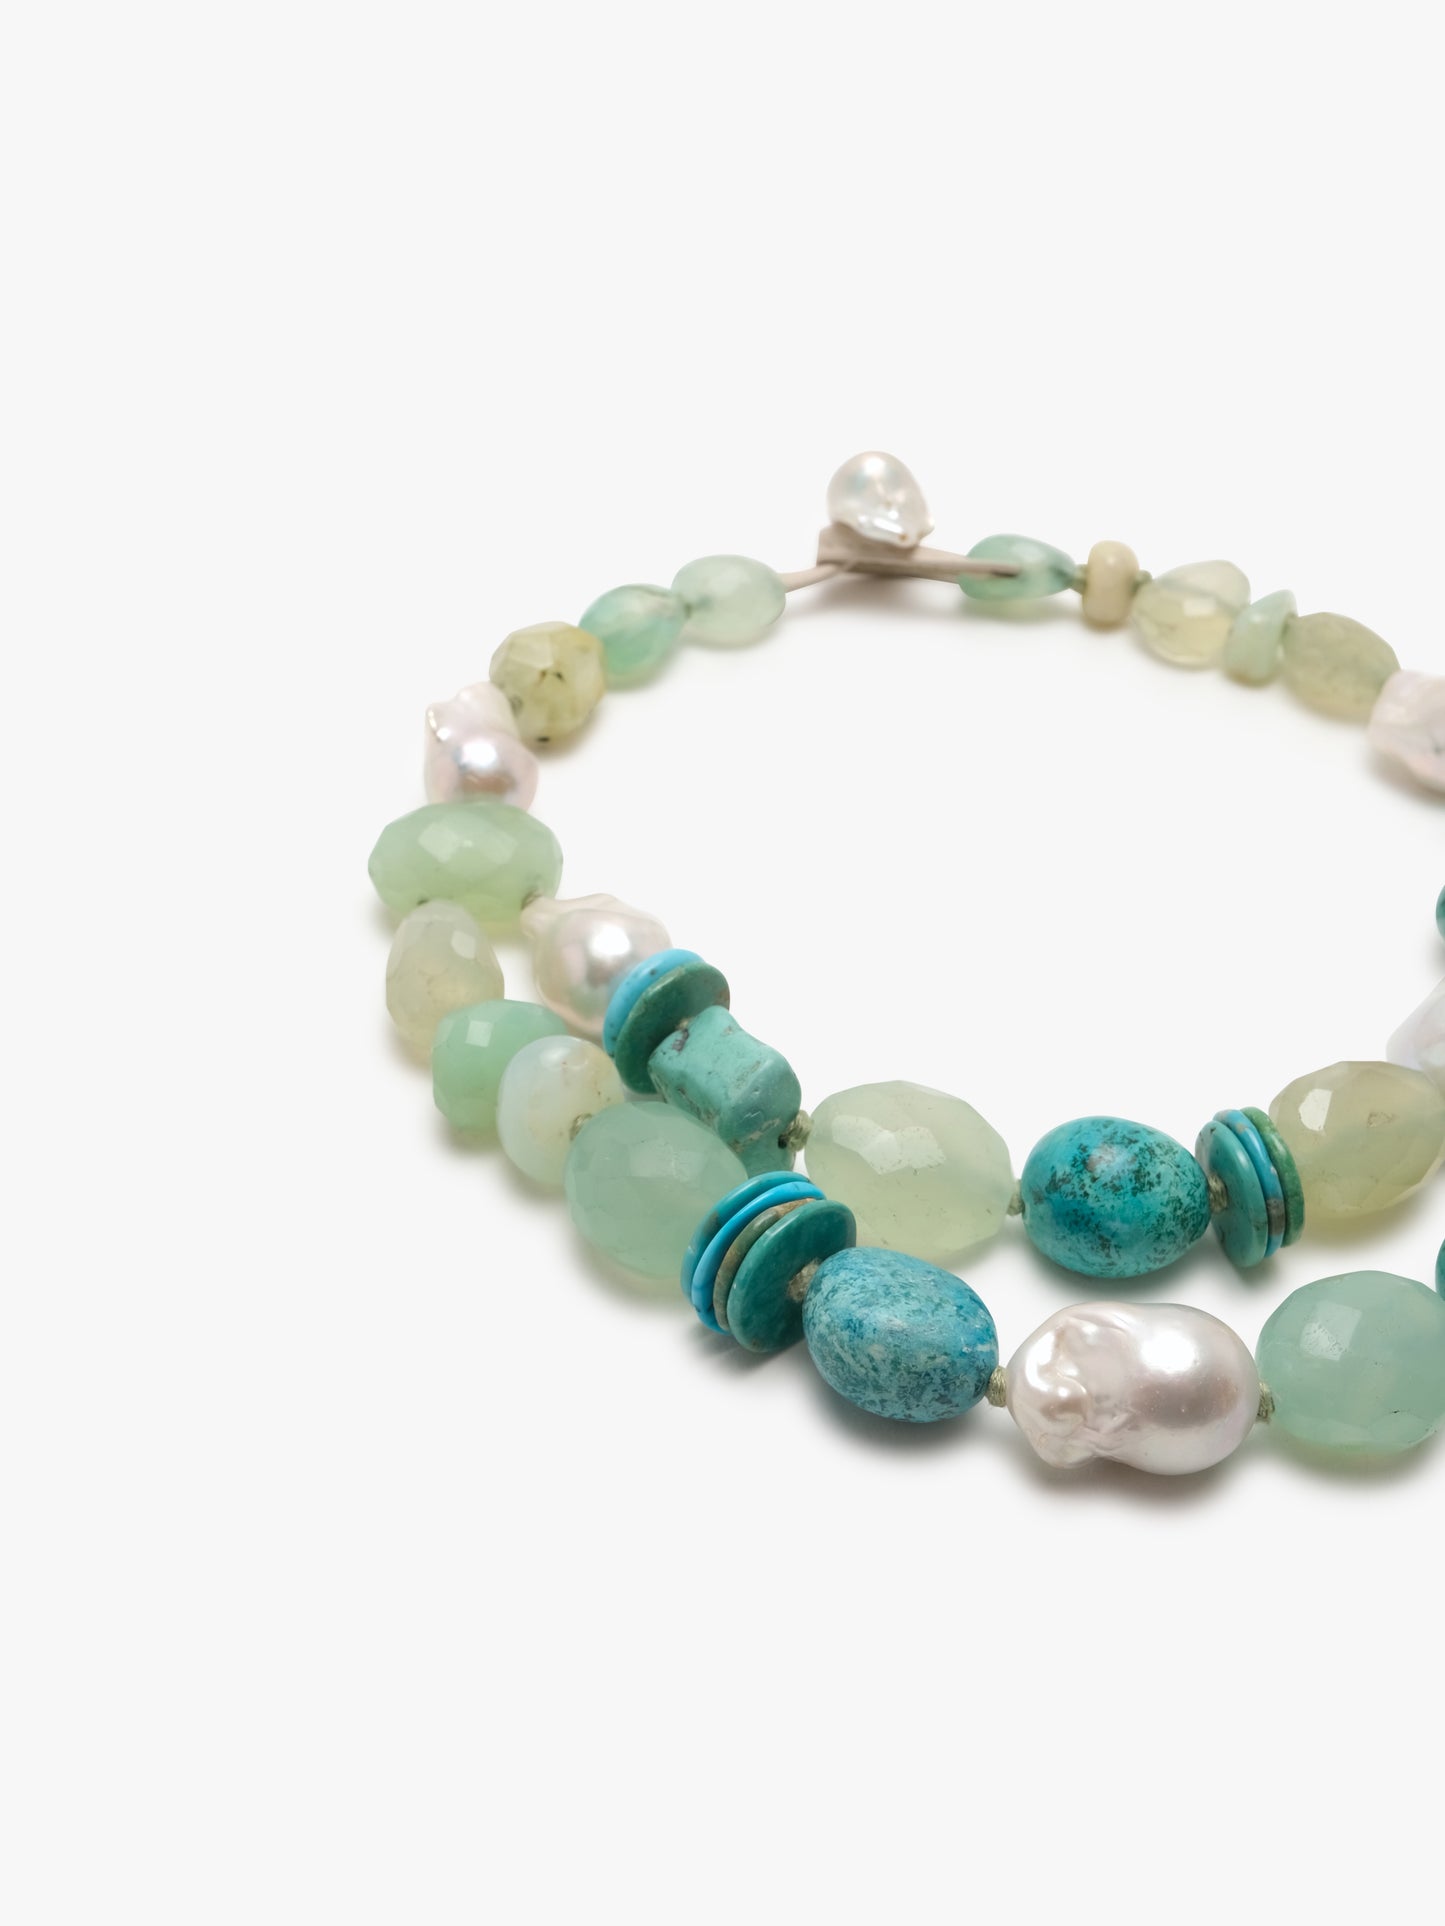 Necklace: prehnite, pearls, turquoise